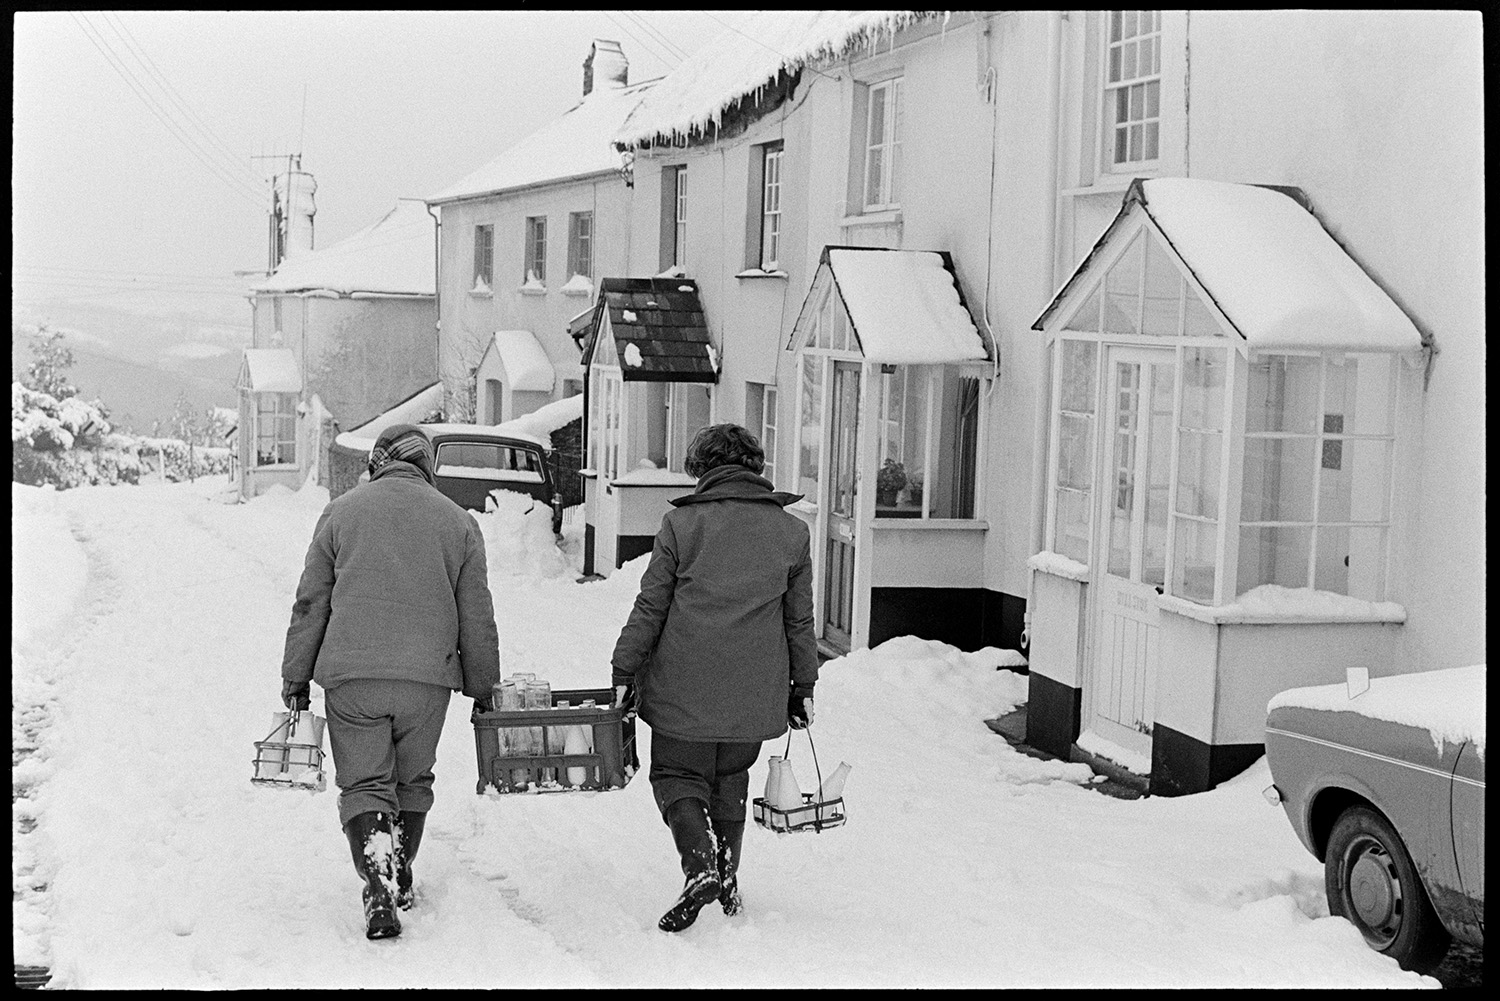 Snow, women delivering milk in village, dog. 
[Dorothy Hiscock and her daughter, Diane Hiscock, delivering milk to houses in West Lane, Dolton. They are carrying a crate of milk bottles between them and another holder of milk in their other hand. The lane and houses are covered in snow. Icicles are hanging from some of the roofs.]